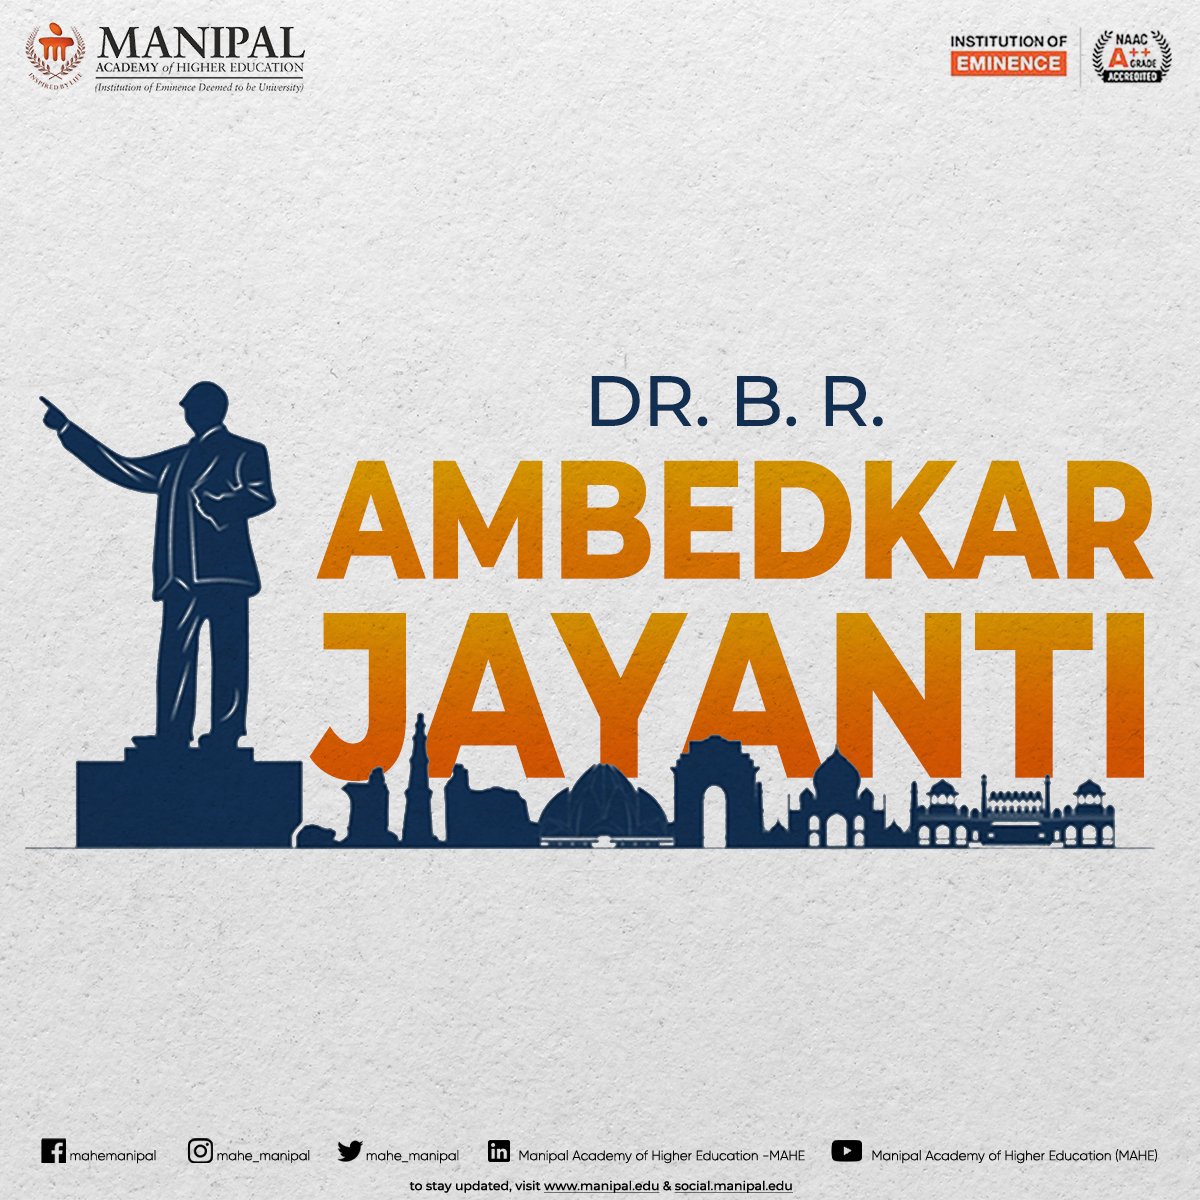 'Be educated, Be organised and Be agitated' - Dr. Bhimrao Ambedkar 

#MAHE remembers the architect of the Indian Constitution Babasaheb Dr. BR Ambedkar on his 132nd birth anniversary.

#MAHE #Manipal #InstituteOfEminence